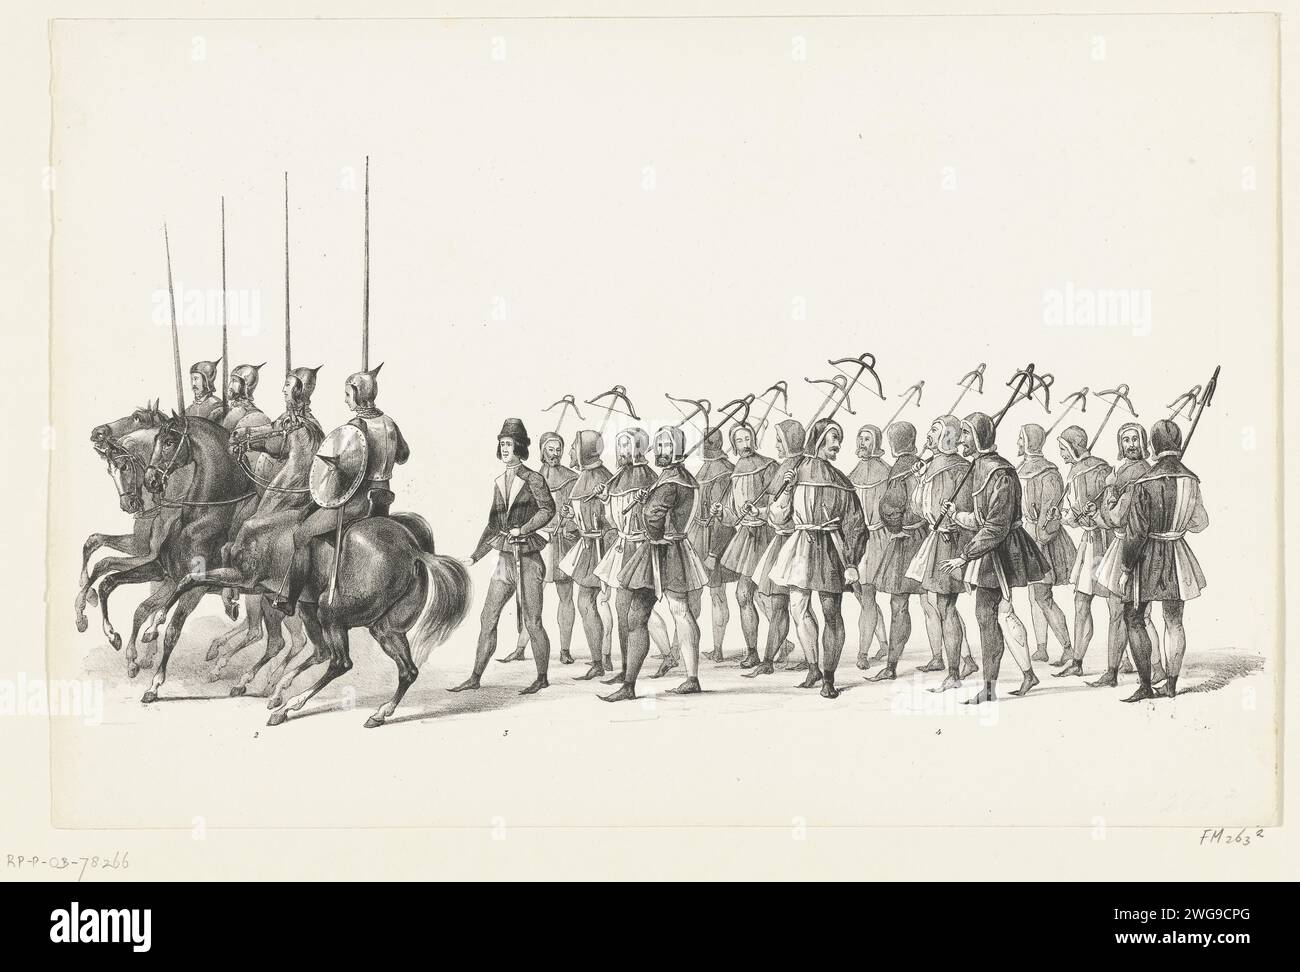 Procession Nrs 2-4, 1840 print Procession nrs 2-4: riders and archers. Part of the press series of the Maskerade of the entry of Hertog Jan van Beieren in Leiden on August 18, 1420 by the Leiden students on February 8, 1840. Netherlands paper  Triummphal Entry and Public Reception, pageant, 'solemn entrance', 'Joyeuse entrance'. Students' Pageant To lead. university of Leiden Stock Photo